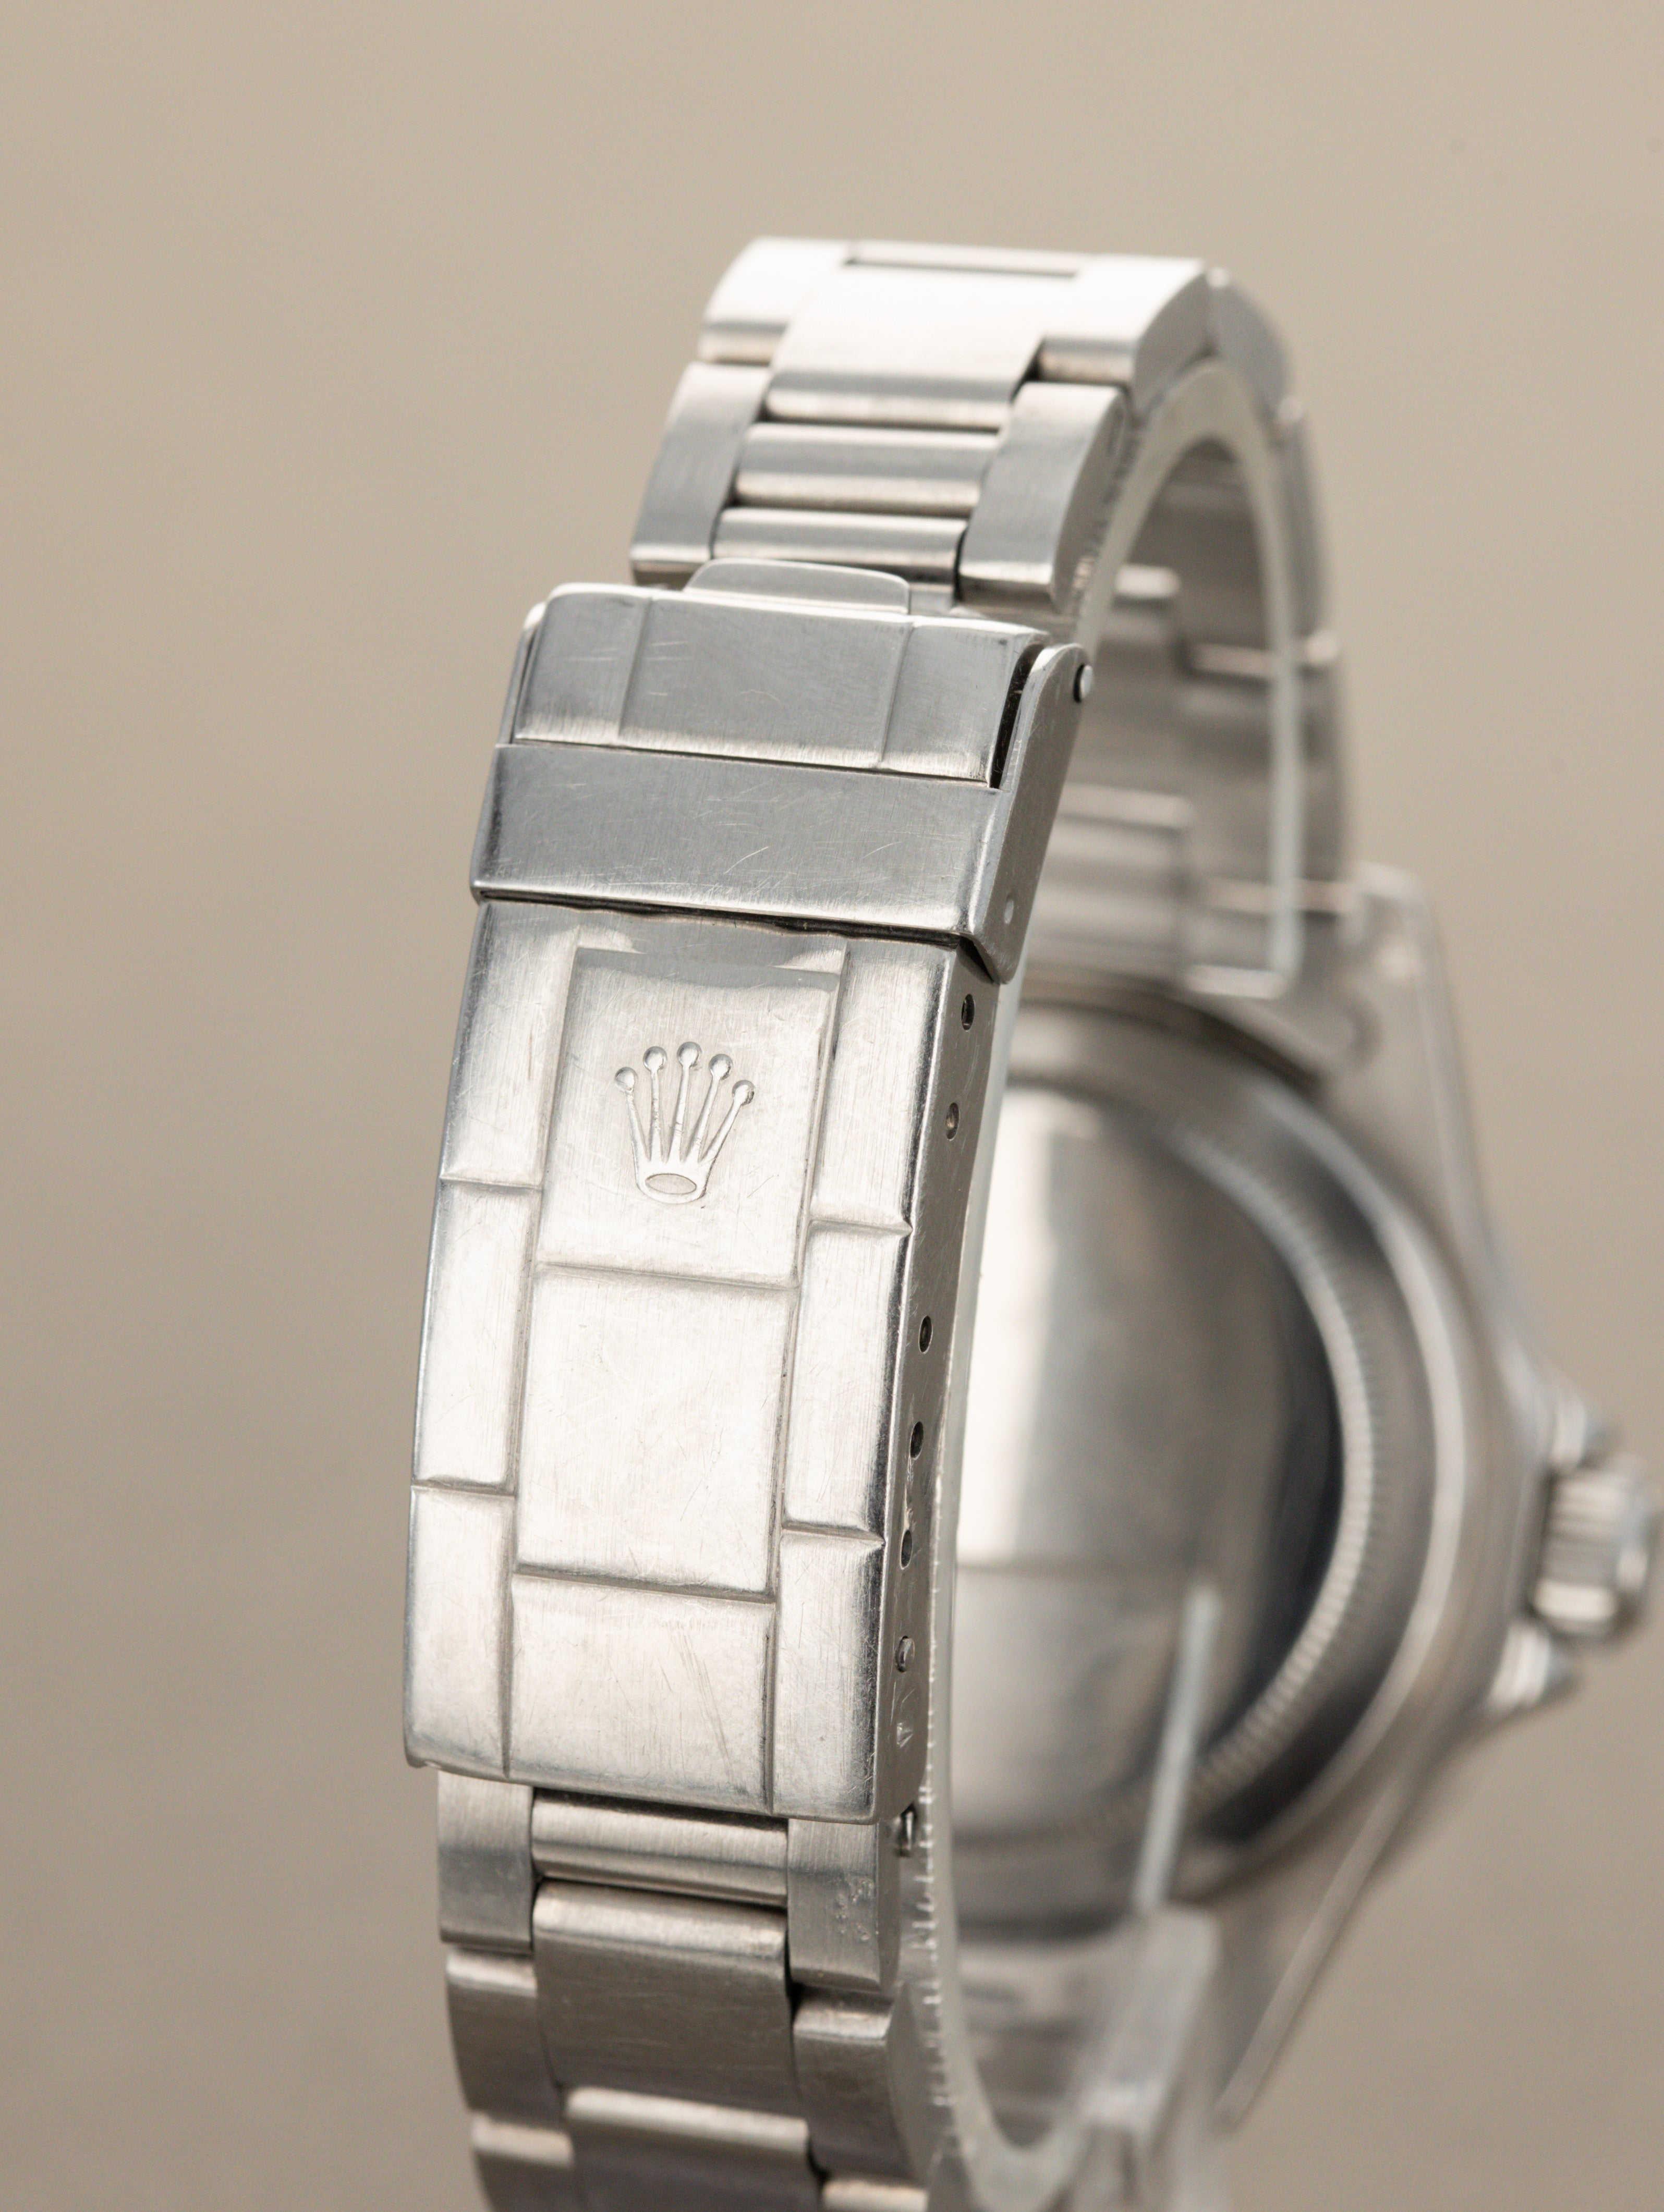 Rolex Submariner Ref. 5513 - 'Meters First' Dial